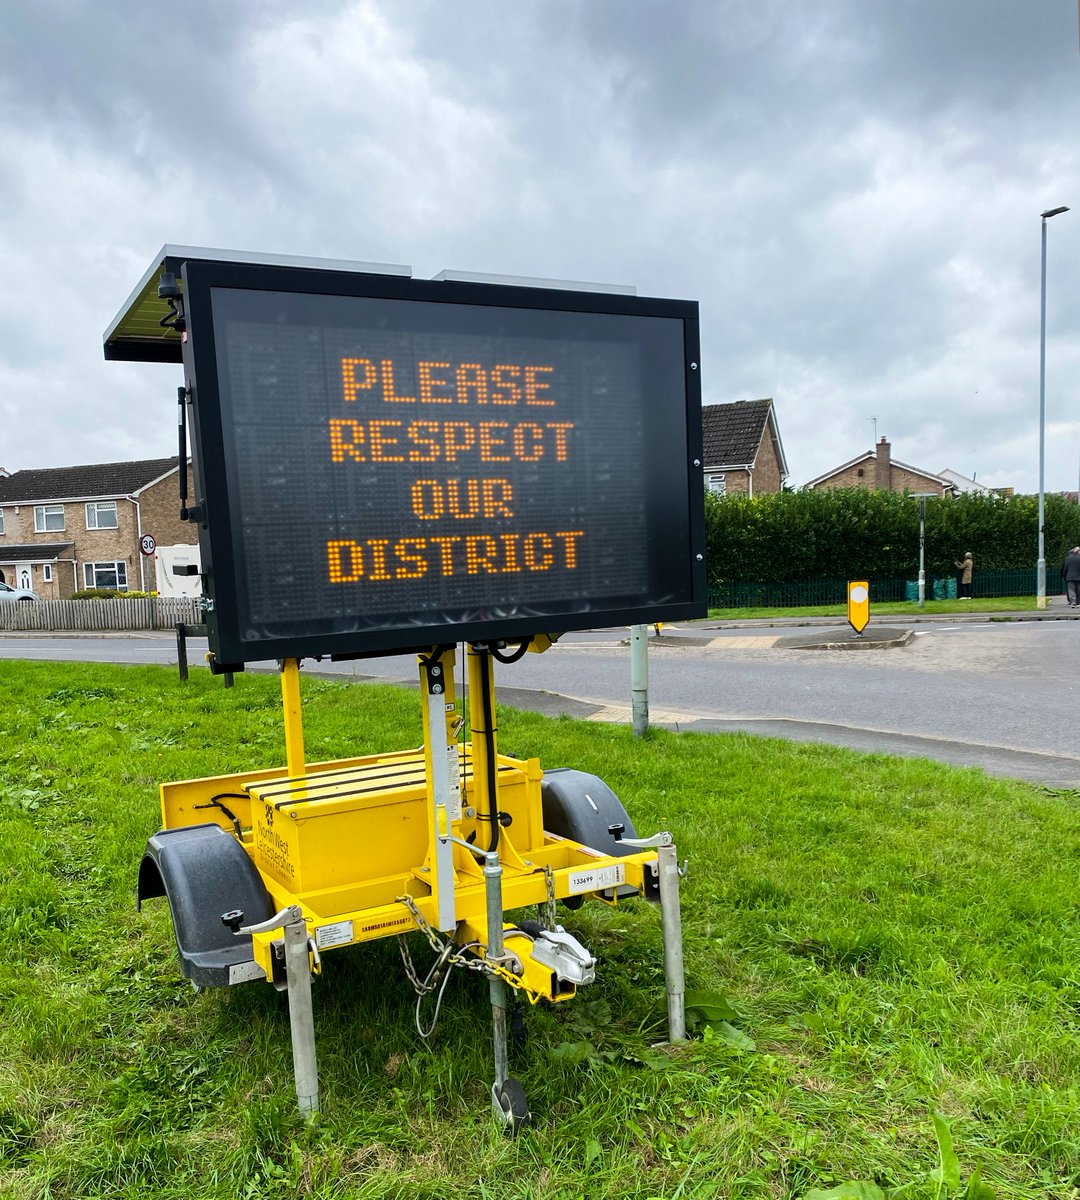 Our matrix sign is supporting
@MeltonBC for the next few days with the Countywide #ItsAllLittering Campaign.  

Whether it's a dropped Banana Skin or a cigarette end thrown from a vehicle, It's All Littering! and you could receive a £150 Fixed Penalty Notice.